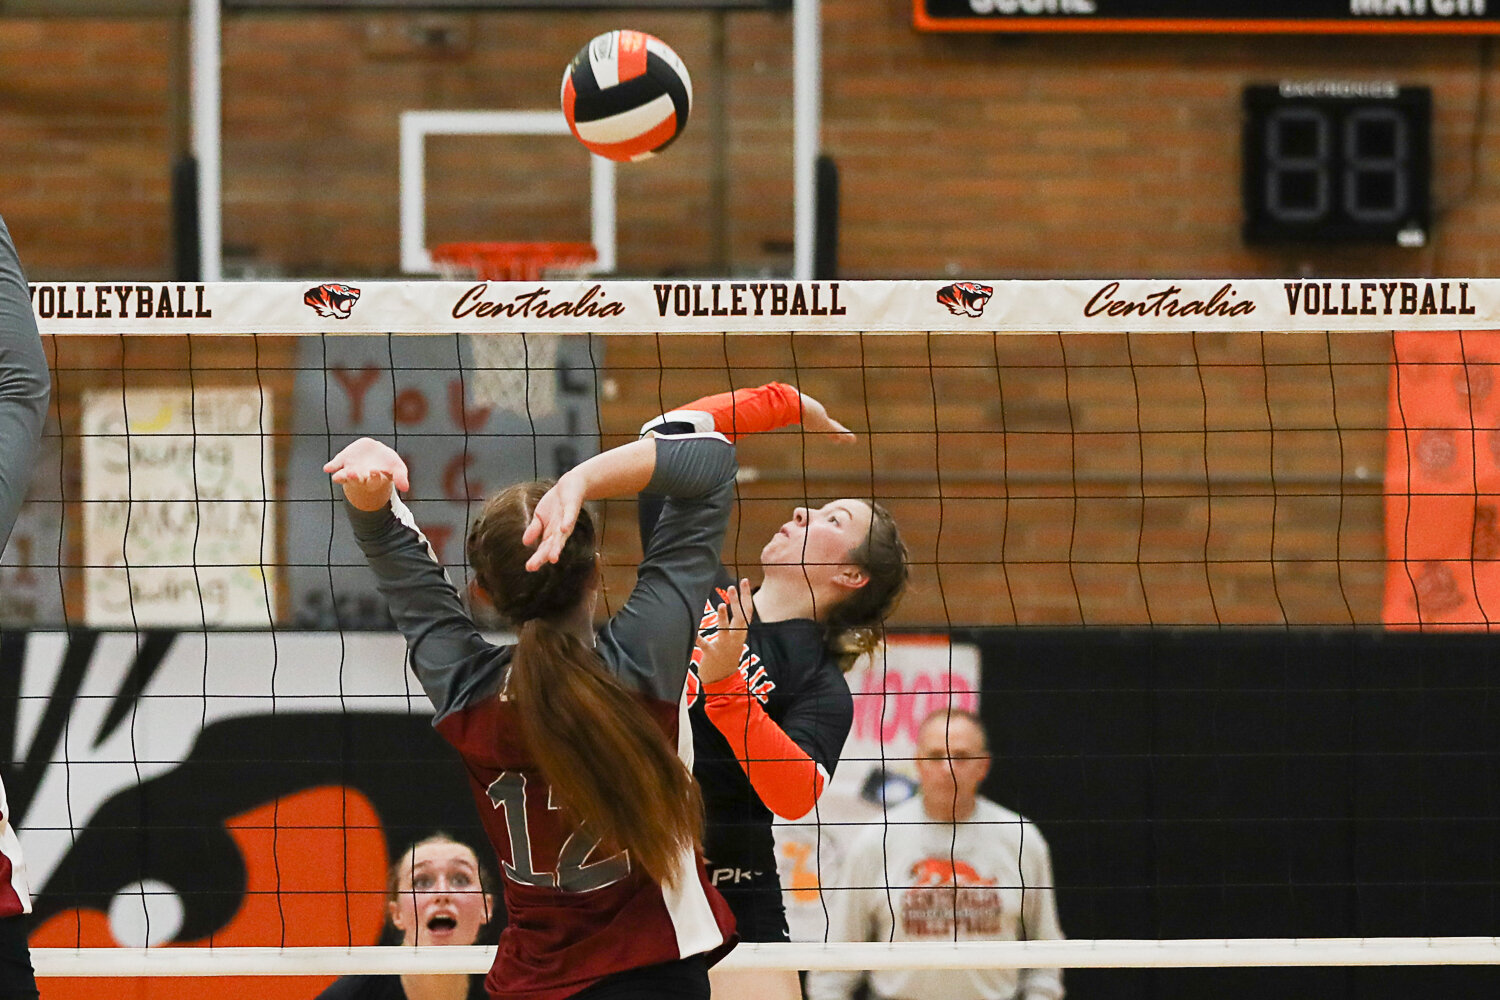 Hollynn Wakefield takes a swing at the net during the third set of Centralia's sweep over W.F. West on Sept. 21.